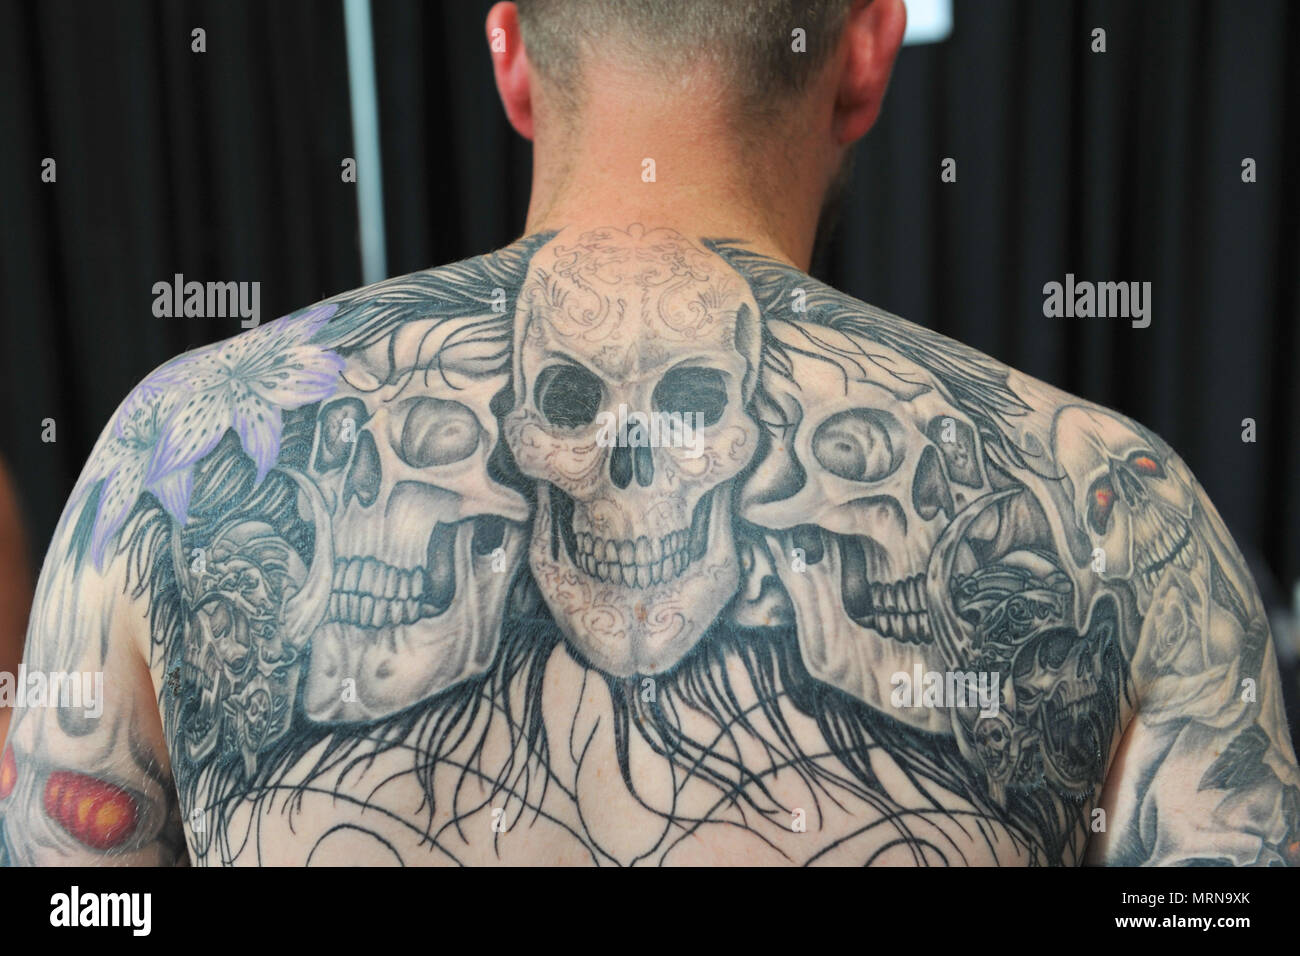 London, UK. 26th May, 2018. A man with a back tattoo at the 5th Great British  Tattoo Show, which is taking place over the weekend in Alexandra Palace,  London, UK. The show